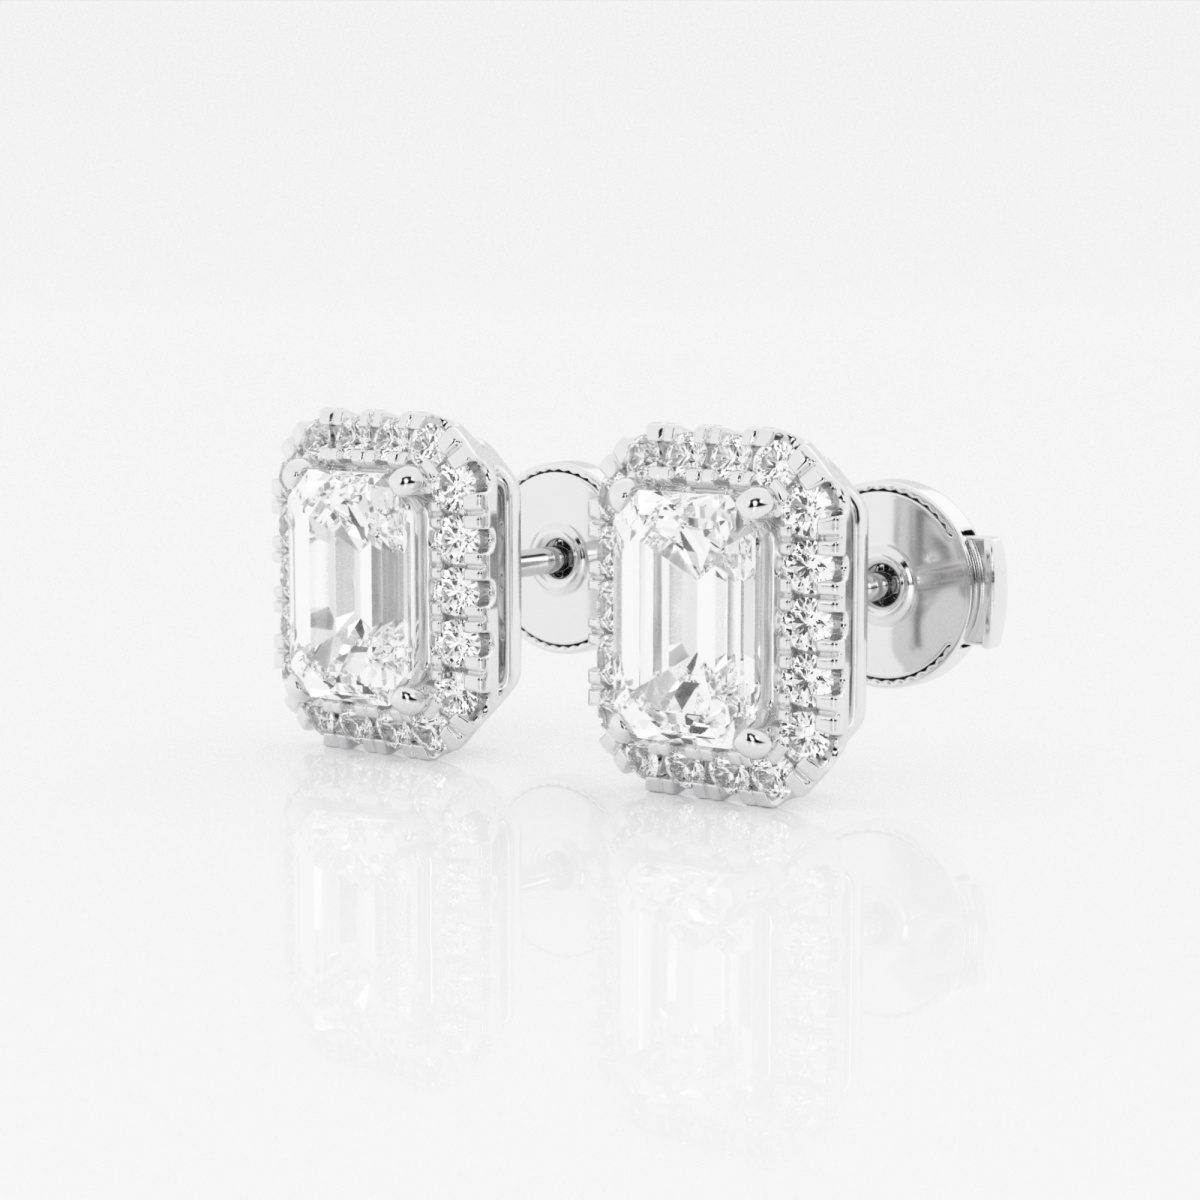 Additional Image 1 for  2 1/3 ctw Emerald Lab Grown Diamond Halo Certified Stud Earrings